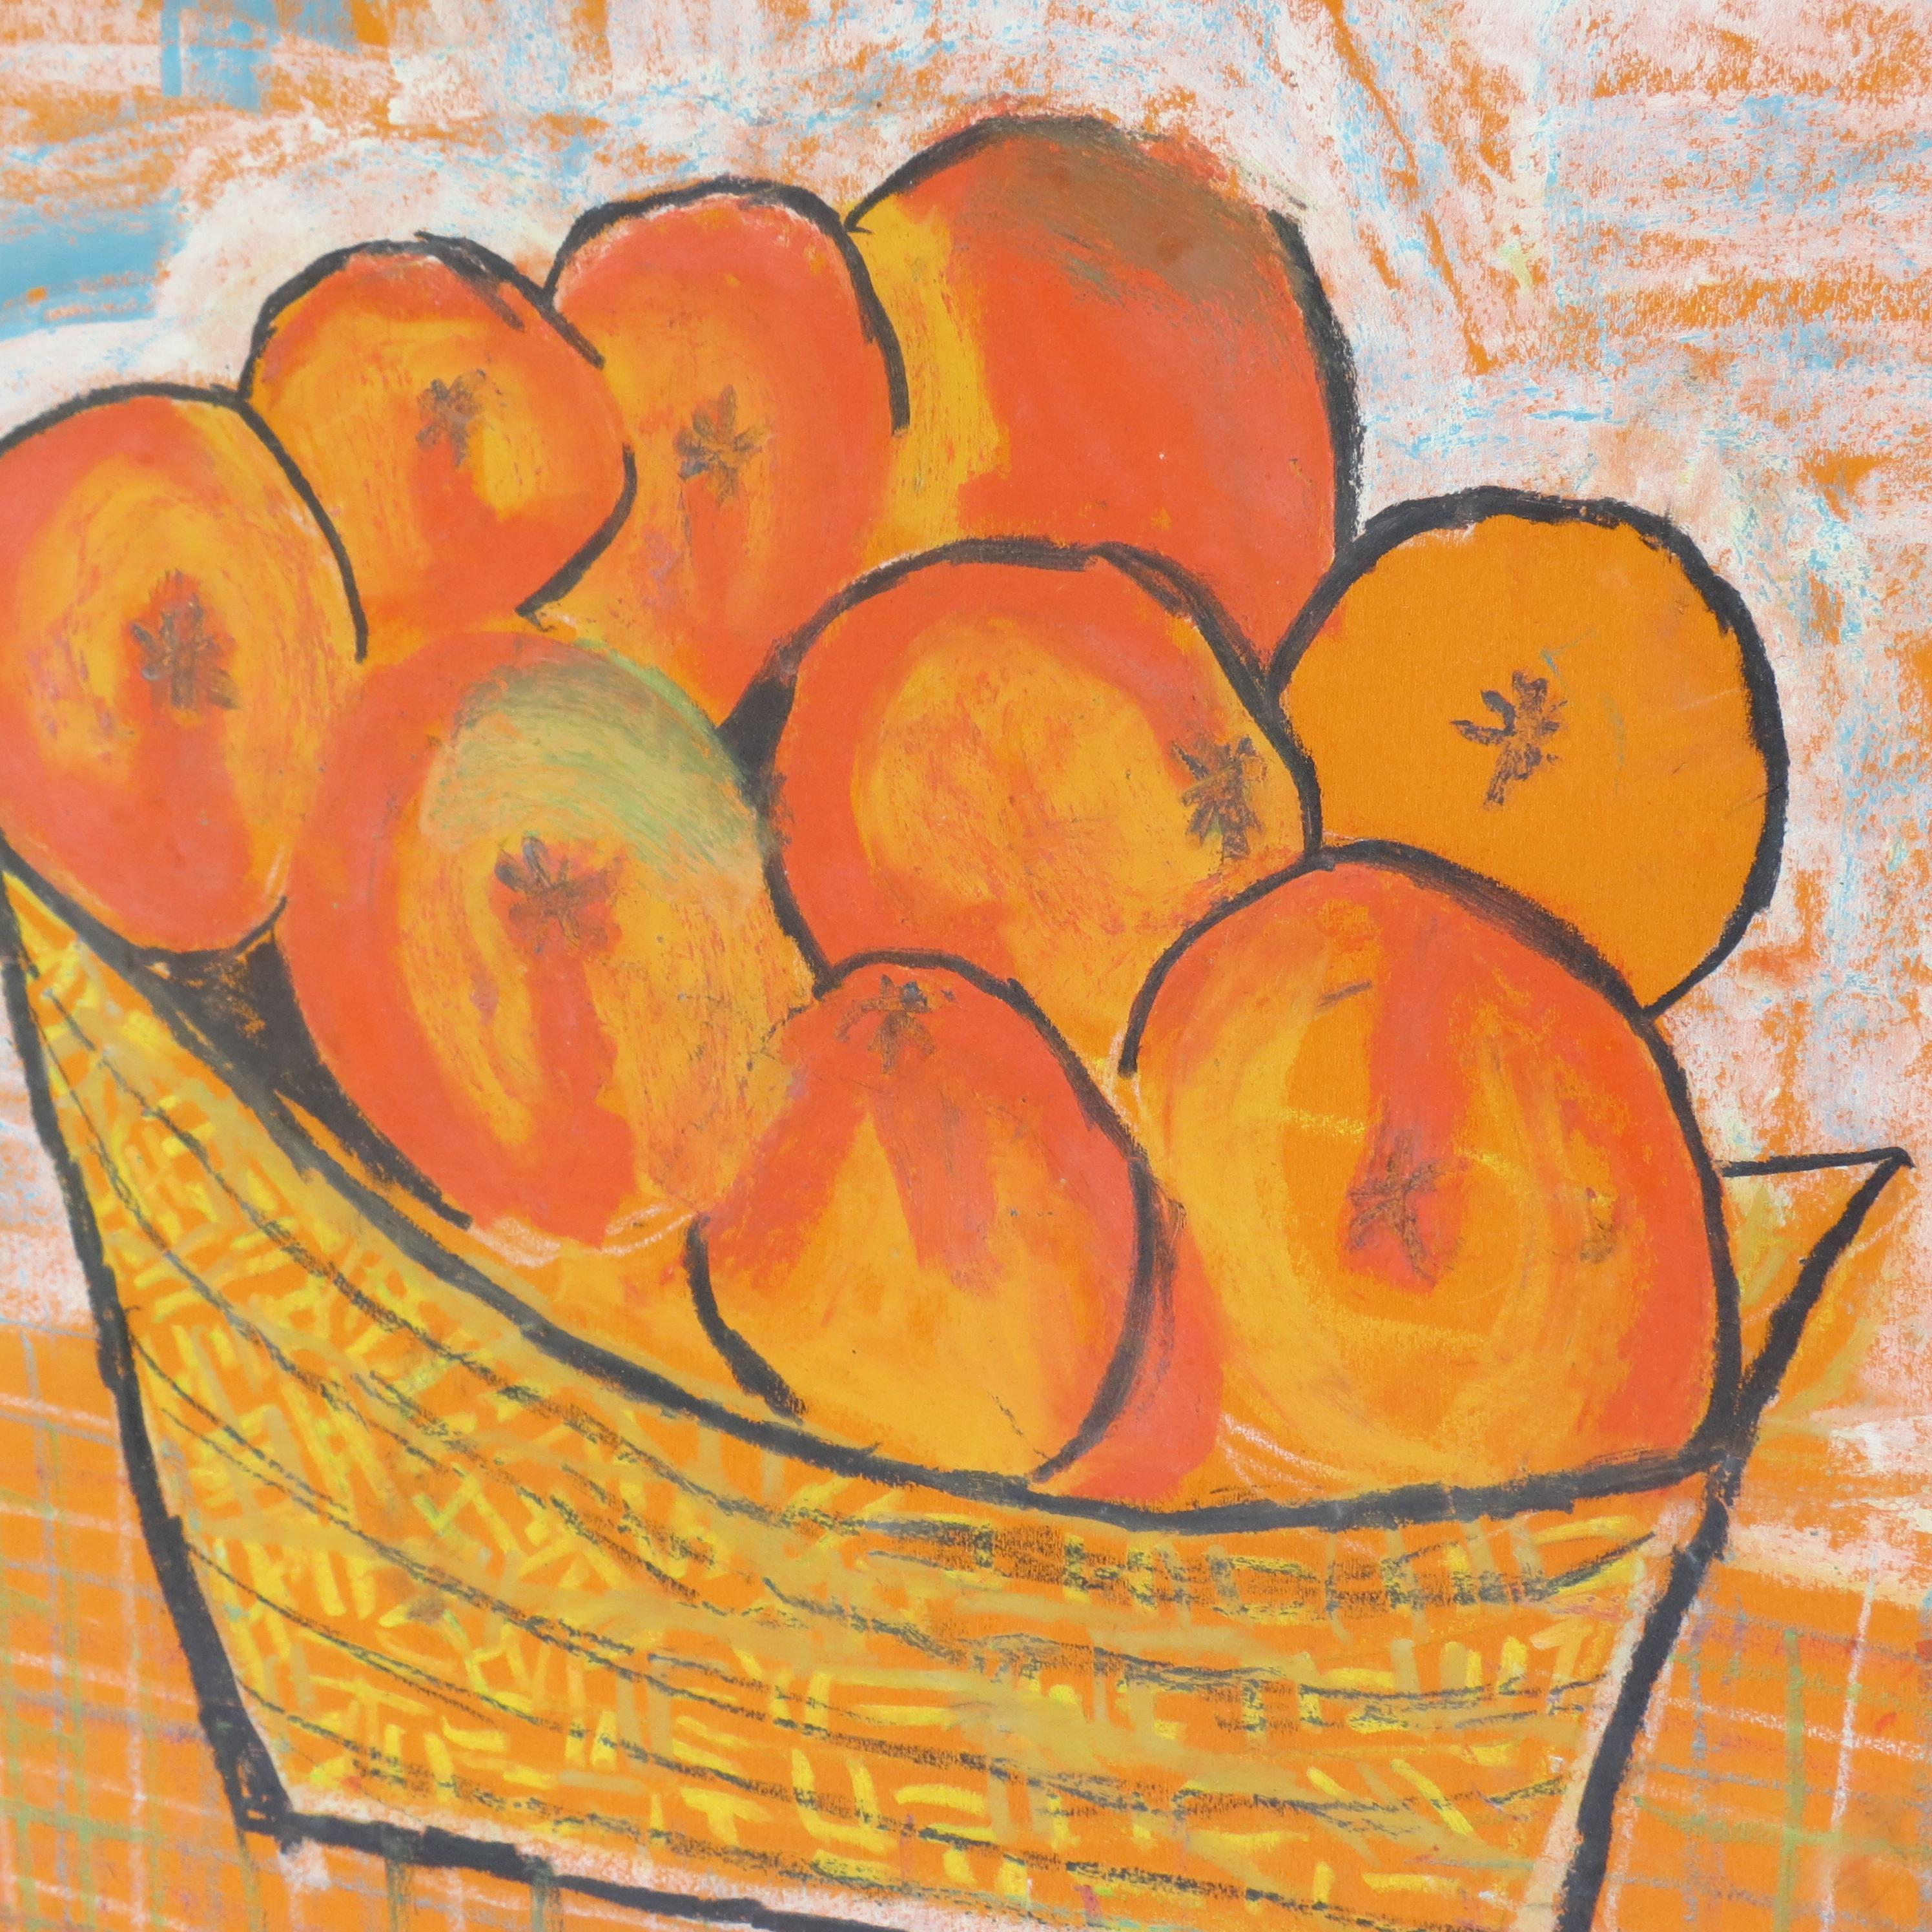 Hand-Crafted Midcentury Pastel Still Life Oranges Painting by Jacobo, 1964